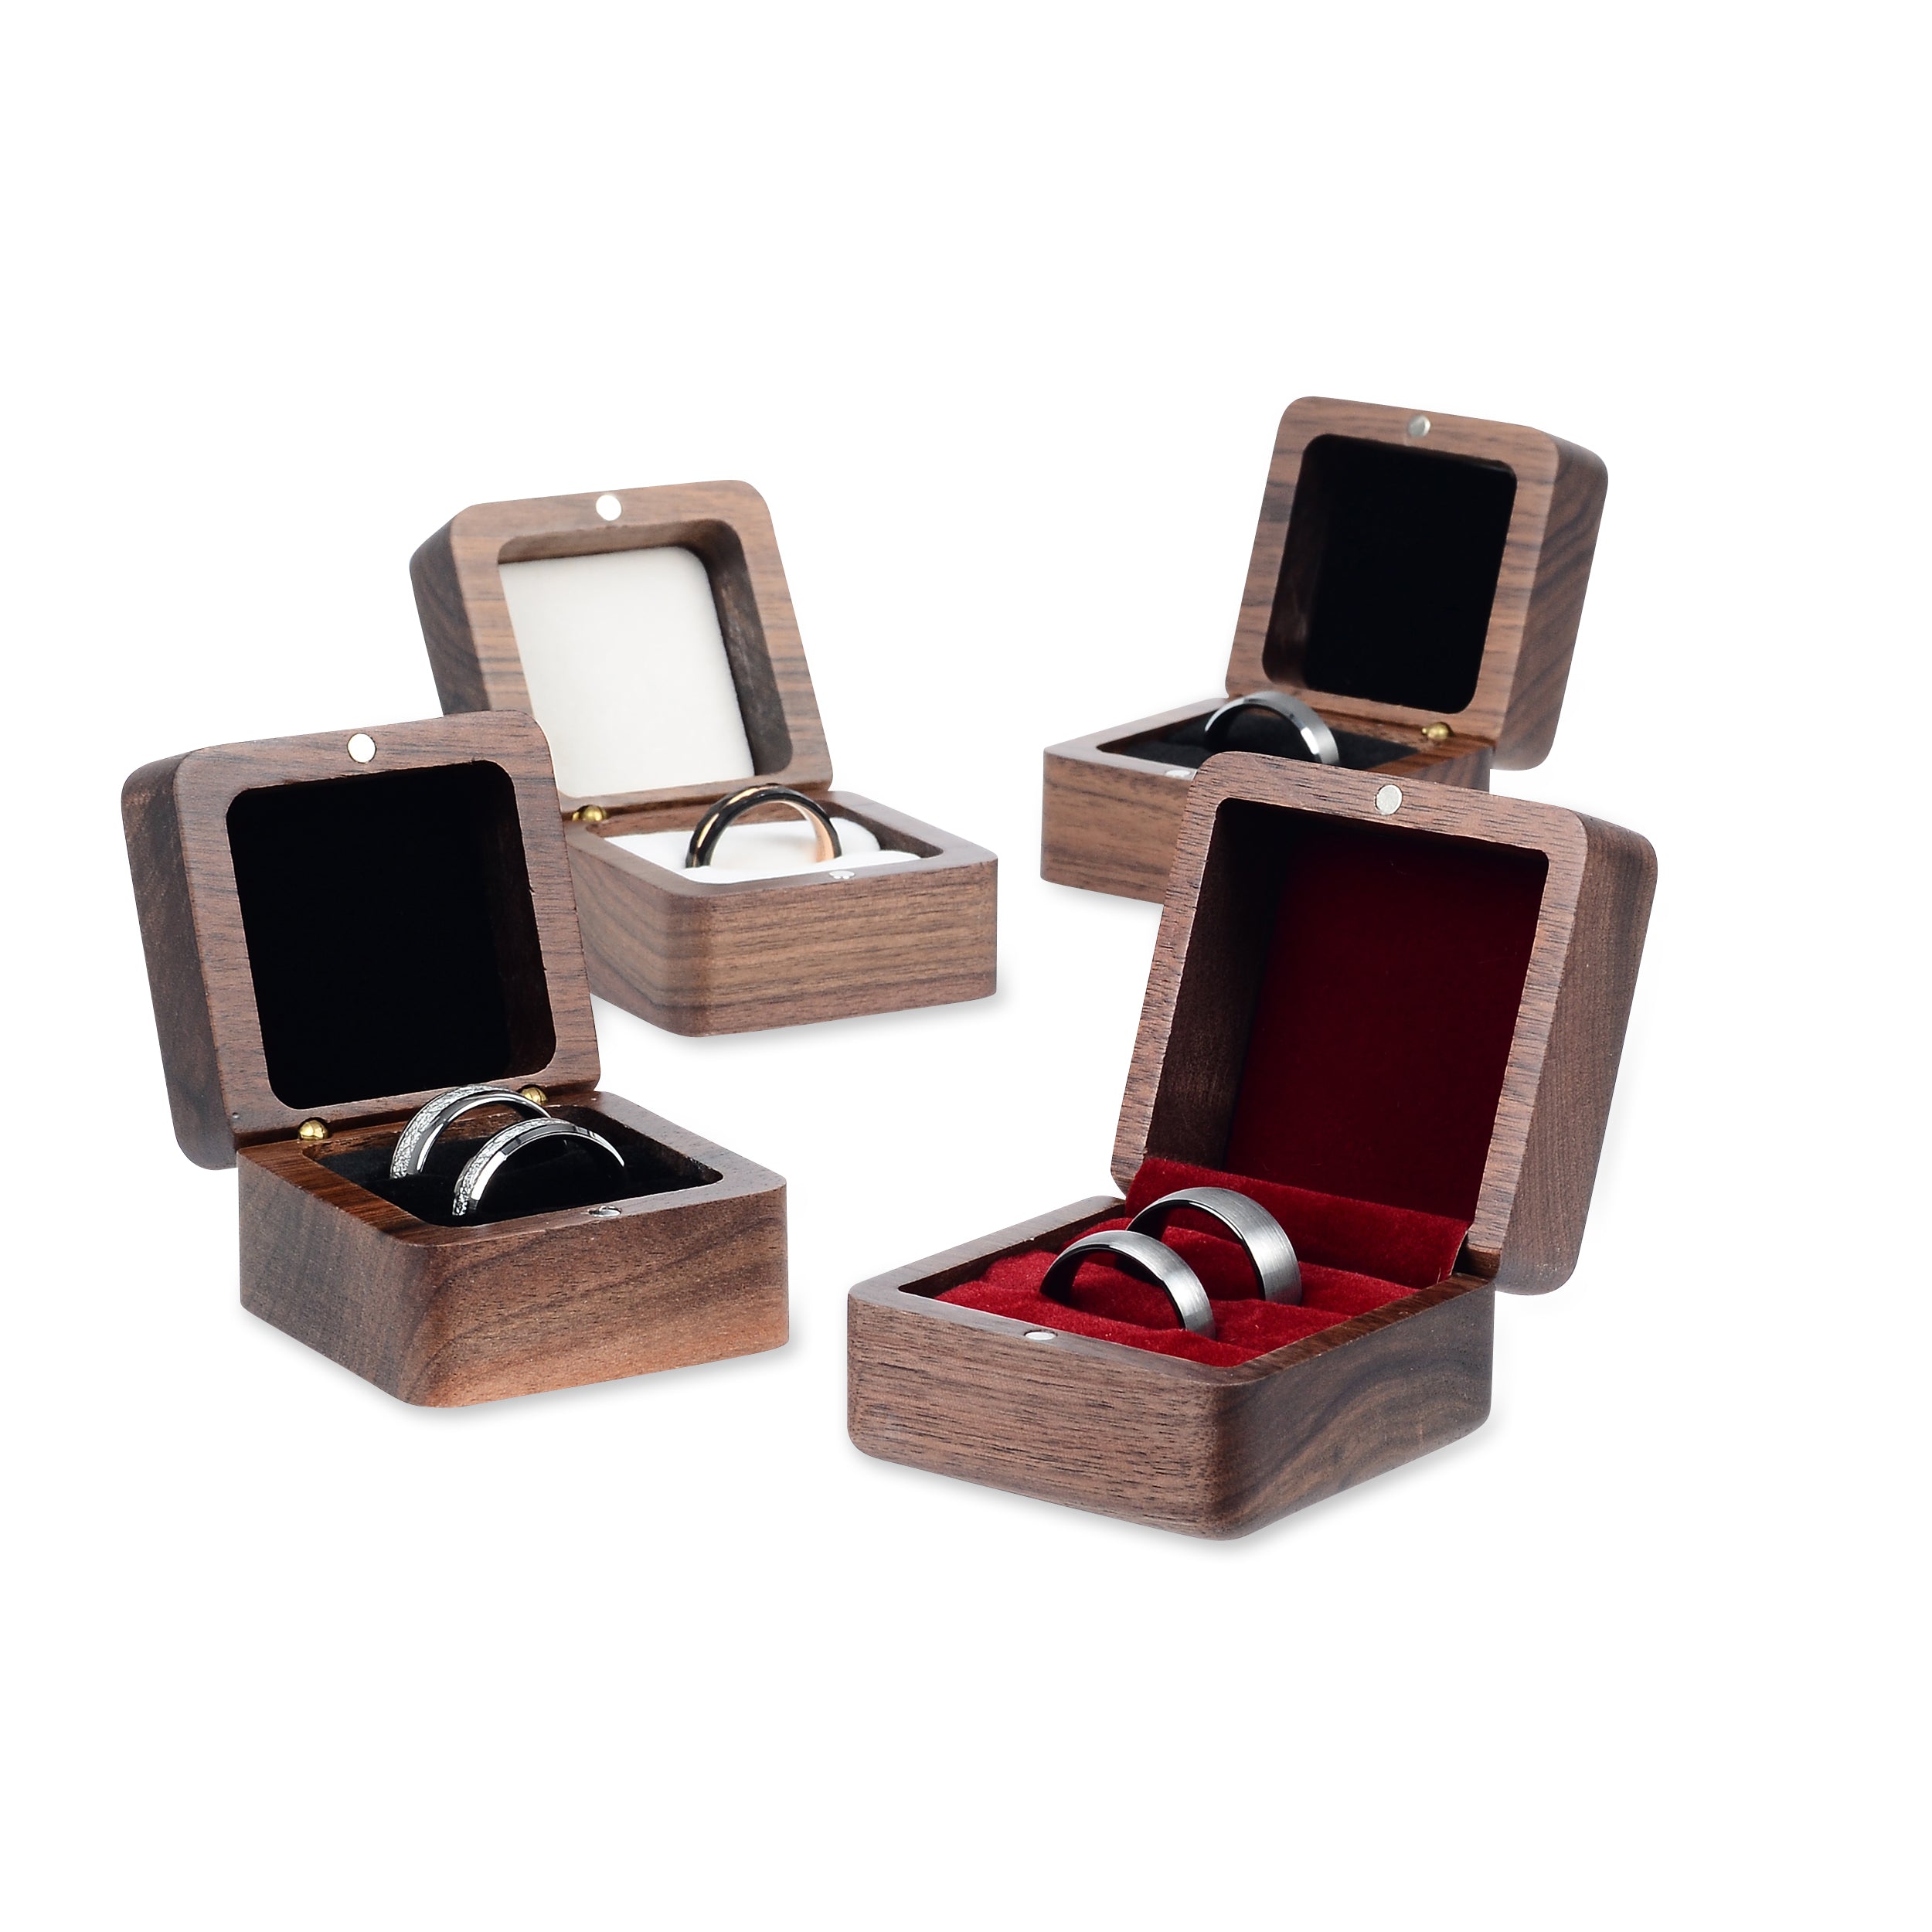 Black Double Ring Case - Premium Real Wood Velvet Cushion Ring Box With Magnetic Lid